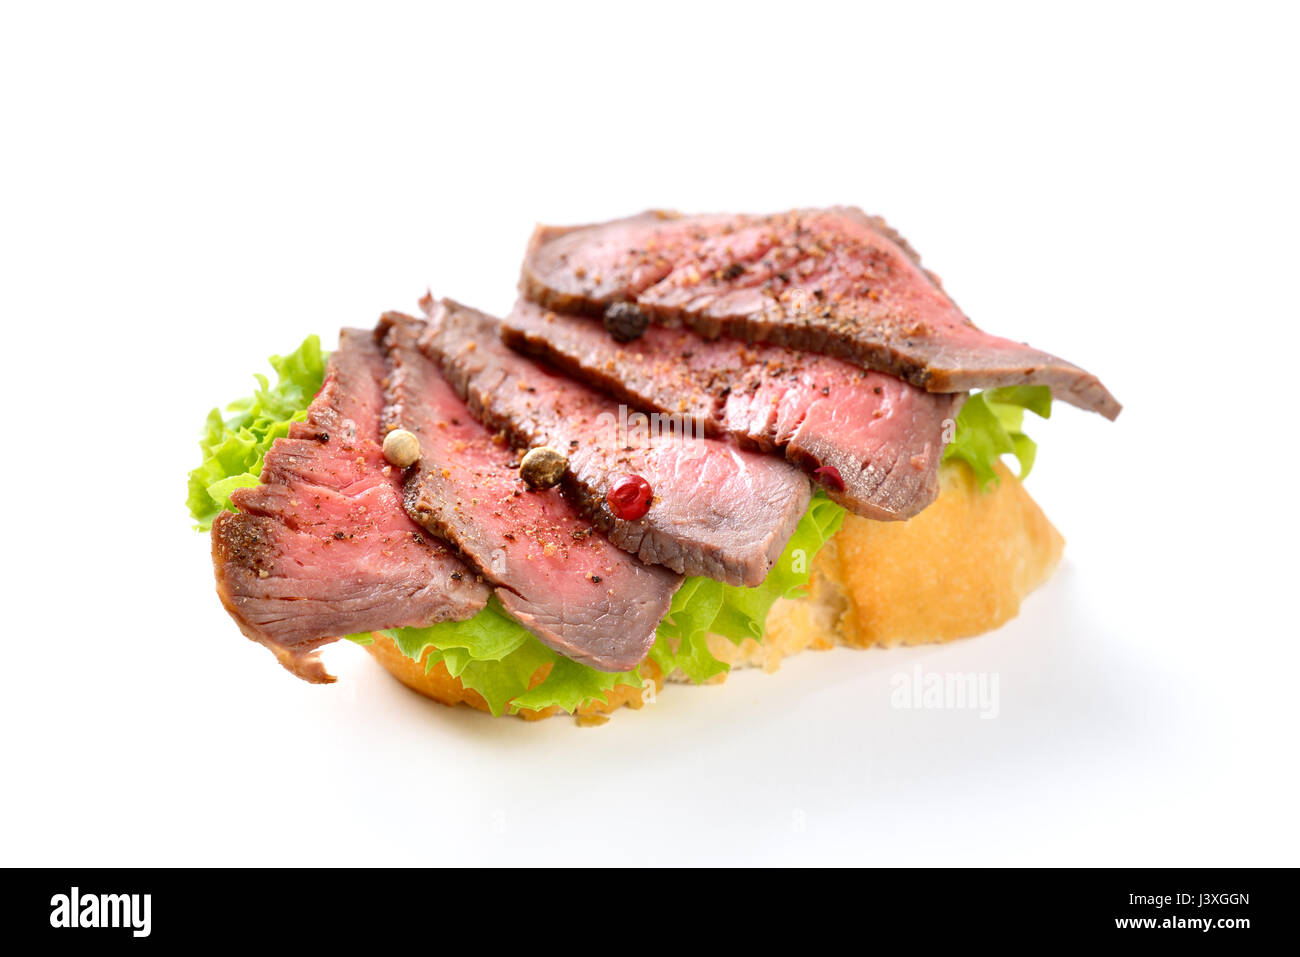 Roasted beef fillet with pepper on a slice of baguette with a leaf of salad Stock Photo